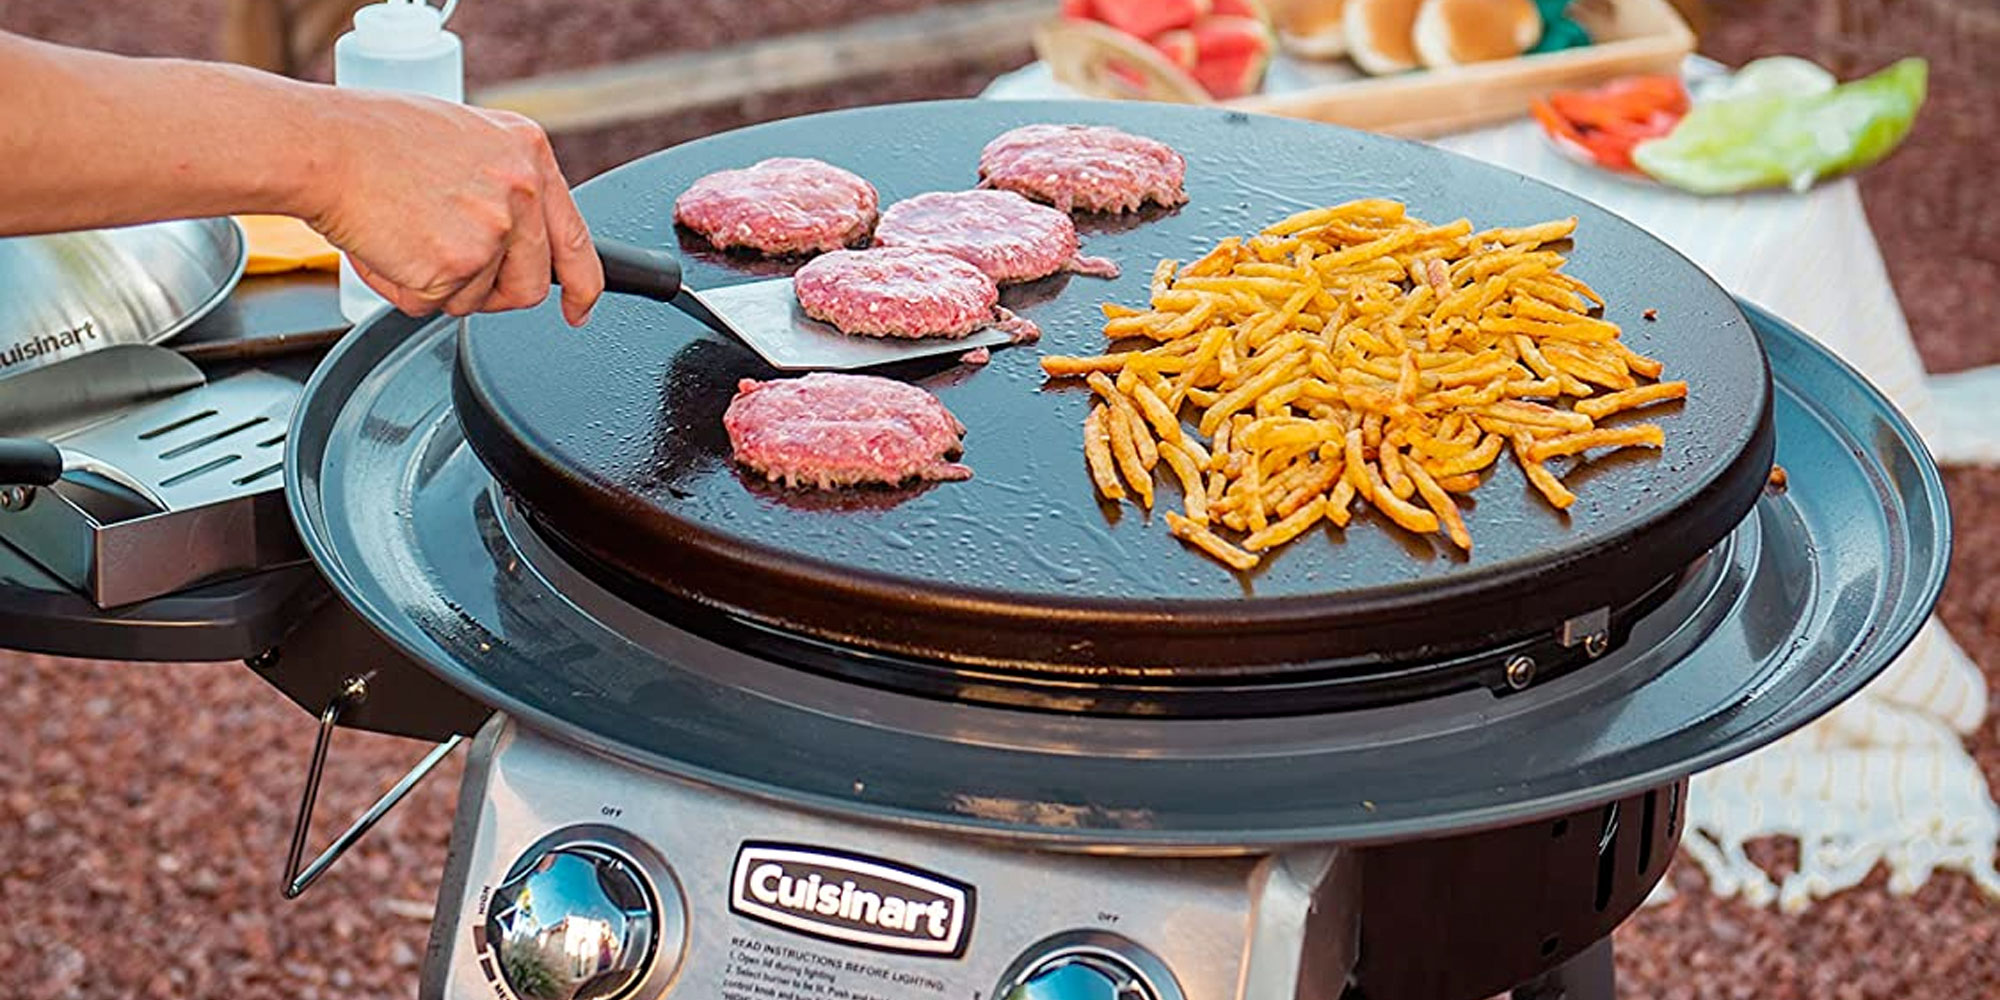 https://9to5toys.com/wp-content/uploads/sites/5/2022/04/cuisinart-flat-top-griddle.jpg